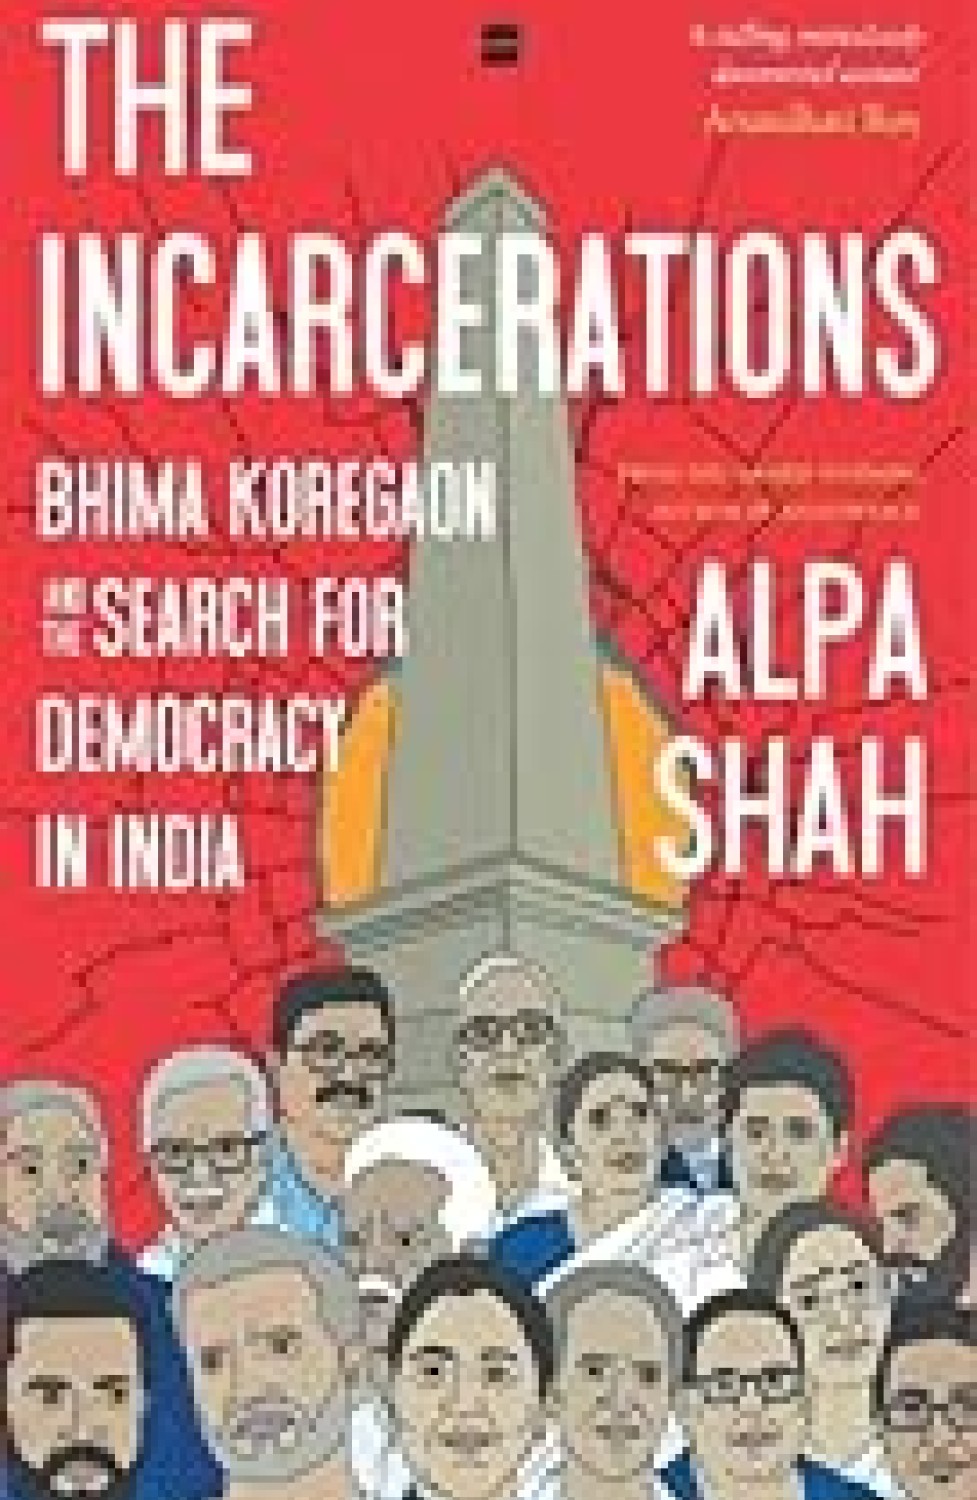 THE INCARCERATIONS : BHIMA KOREGAON AND THE SEARCH FOR DEMOCRACY IN INDIA